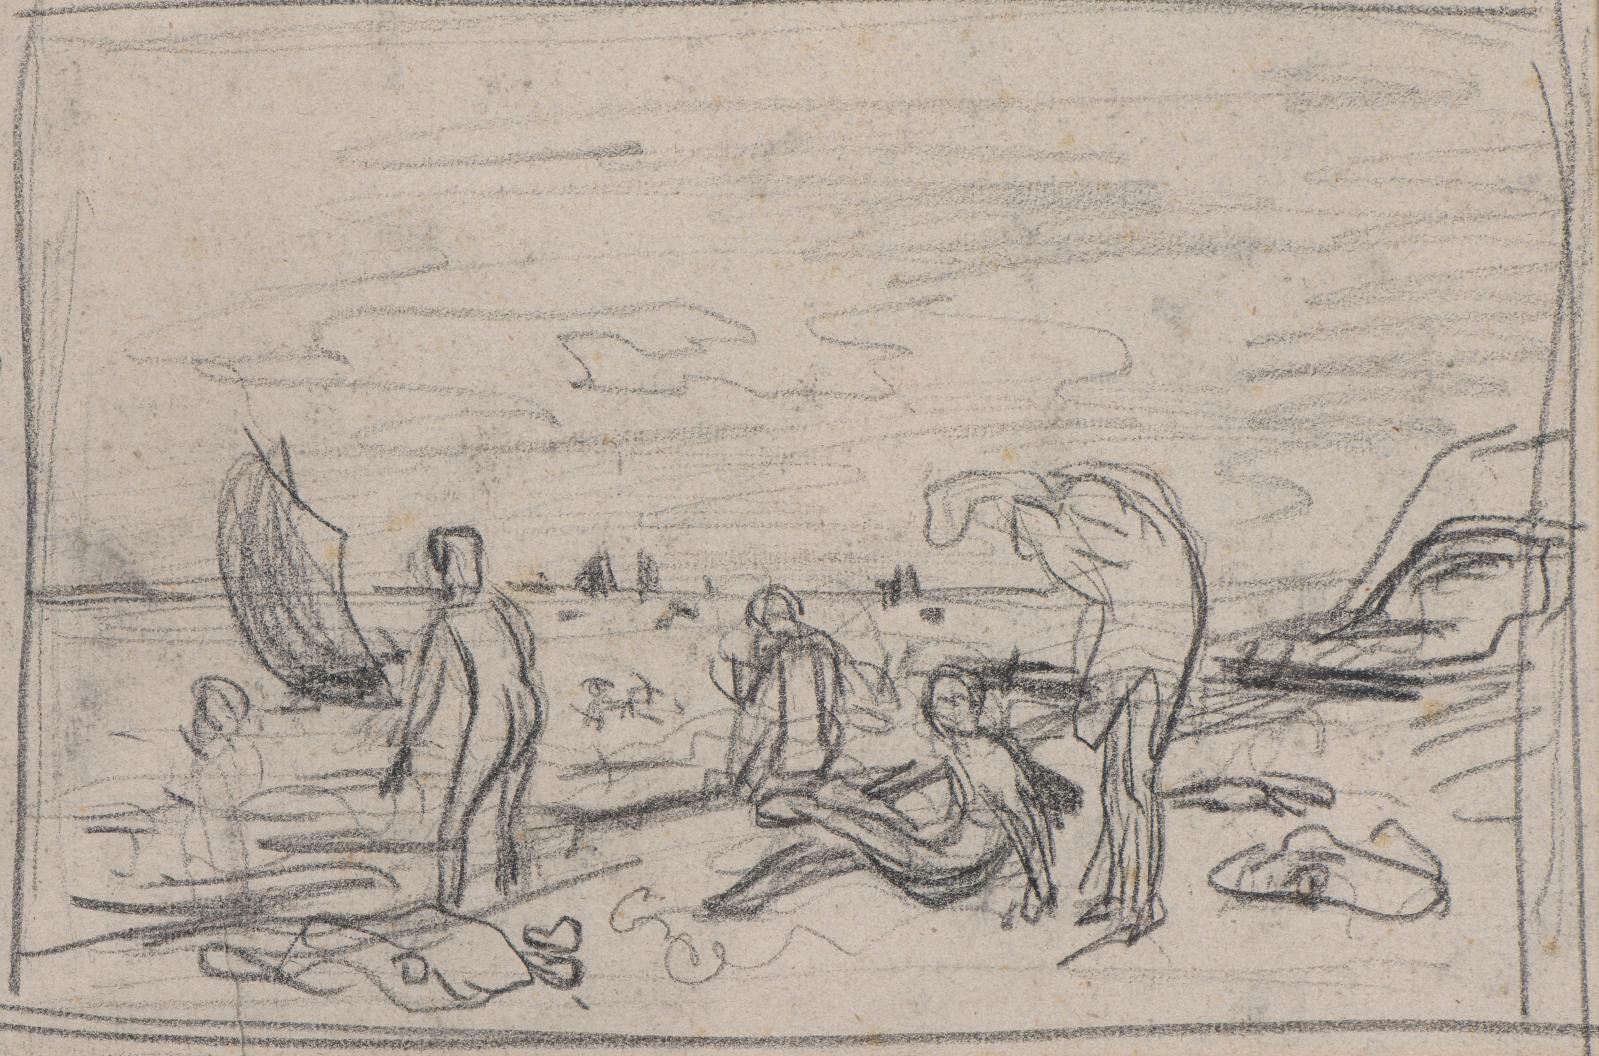 Frederic Bazille (1841-1870), Baigneurs sur une plage (Bathers on a Beach), 1864 or 1869, black pencil, framing marks, 17 x 26 cm/6.7 x 10